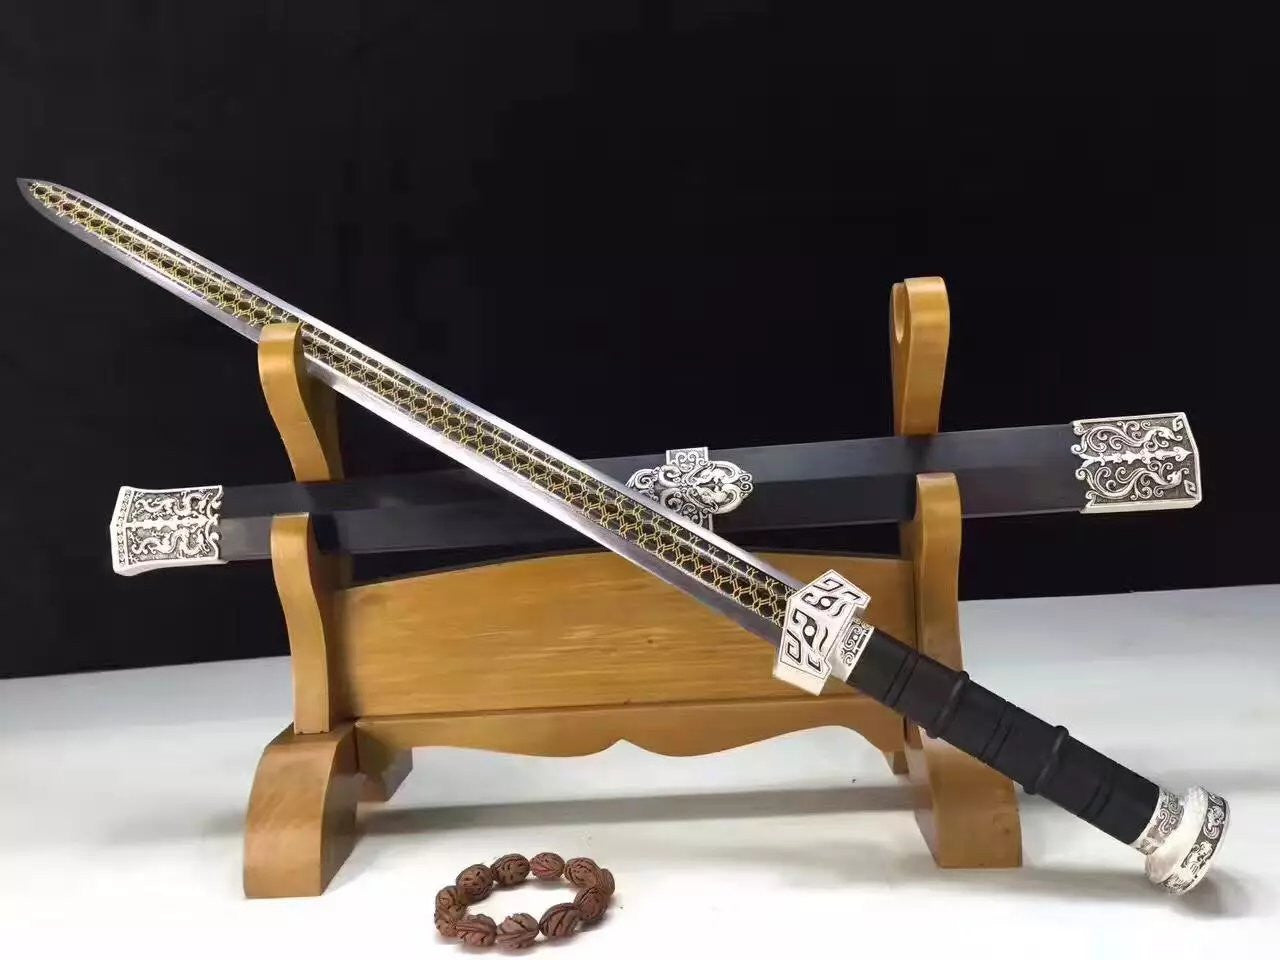 CHIBI sword,High carbon steel,Wood scabbard,Alloy fitting&Handmade art - Chinese sword shop